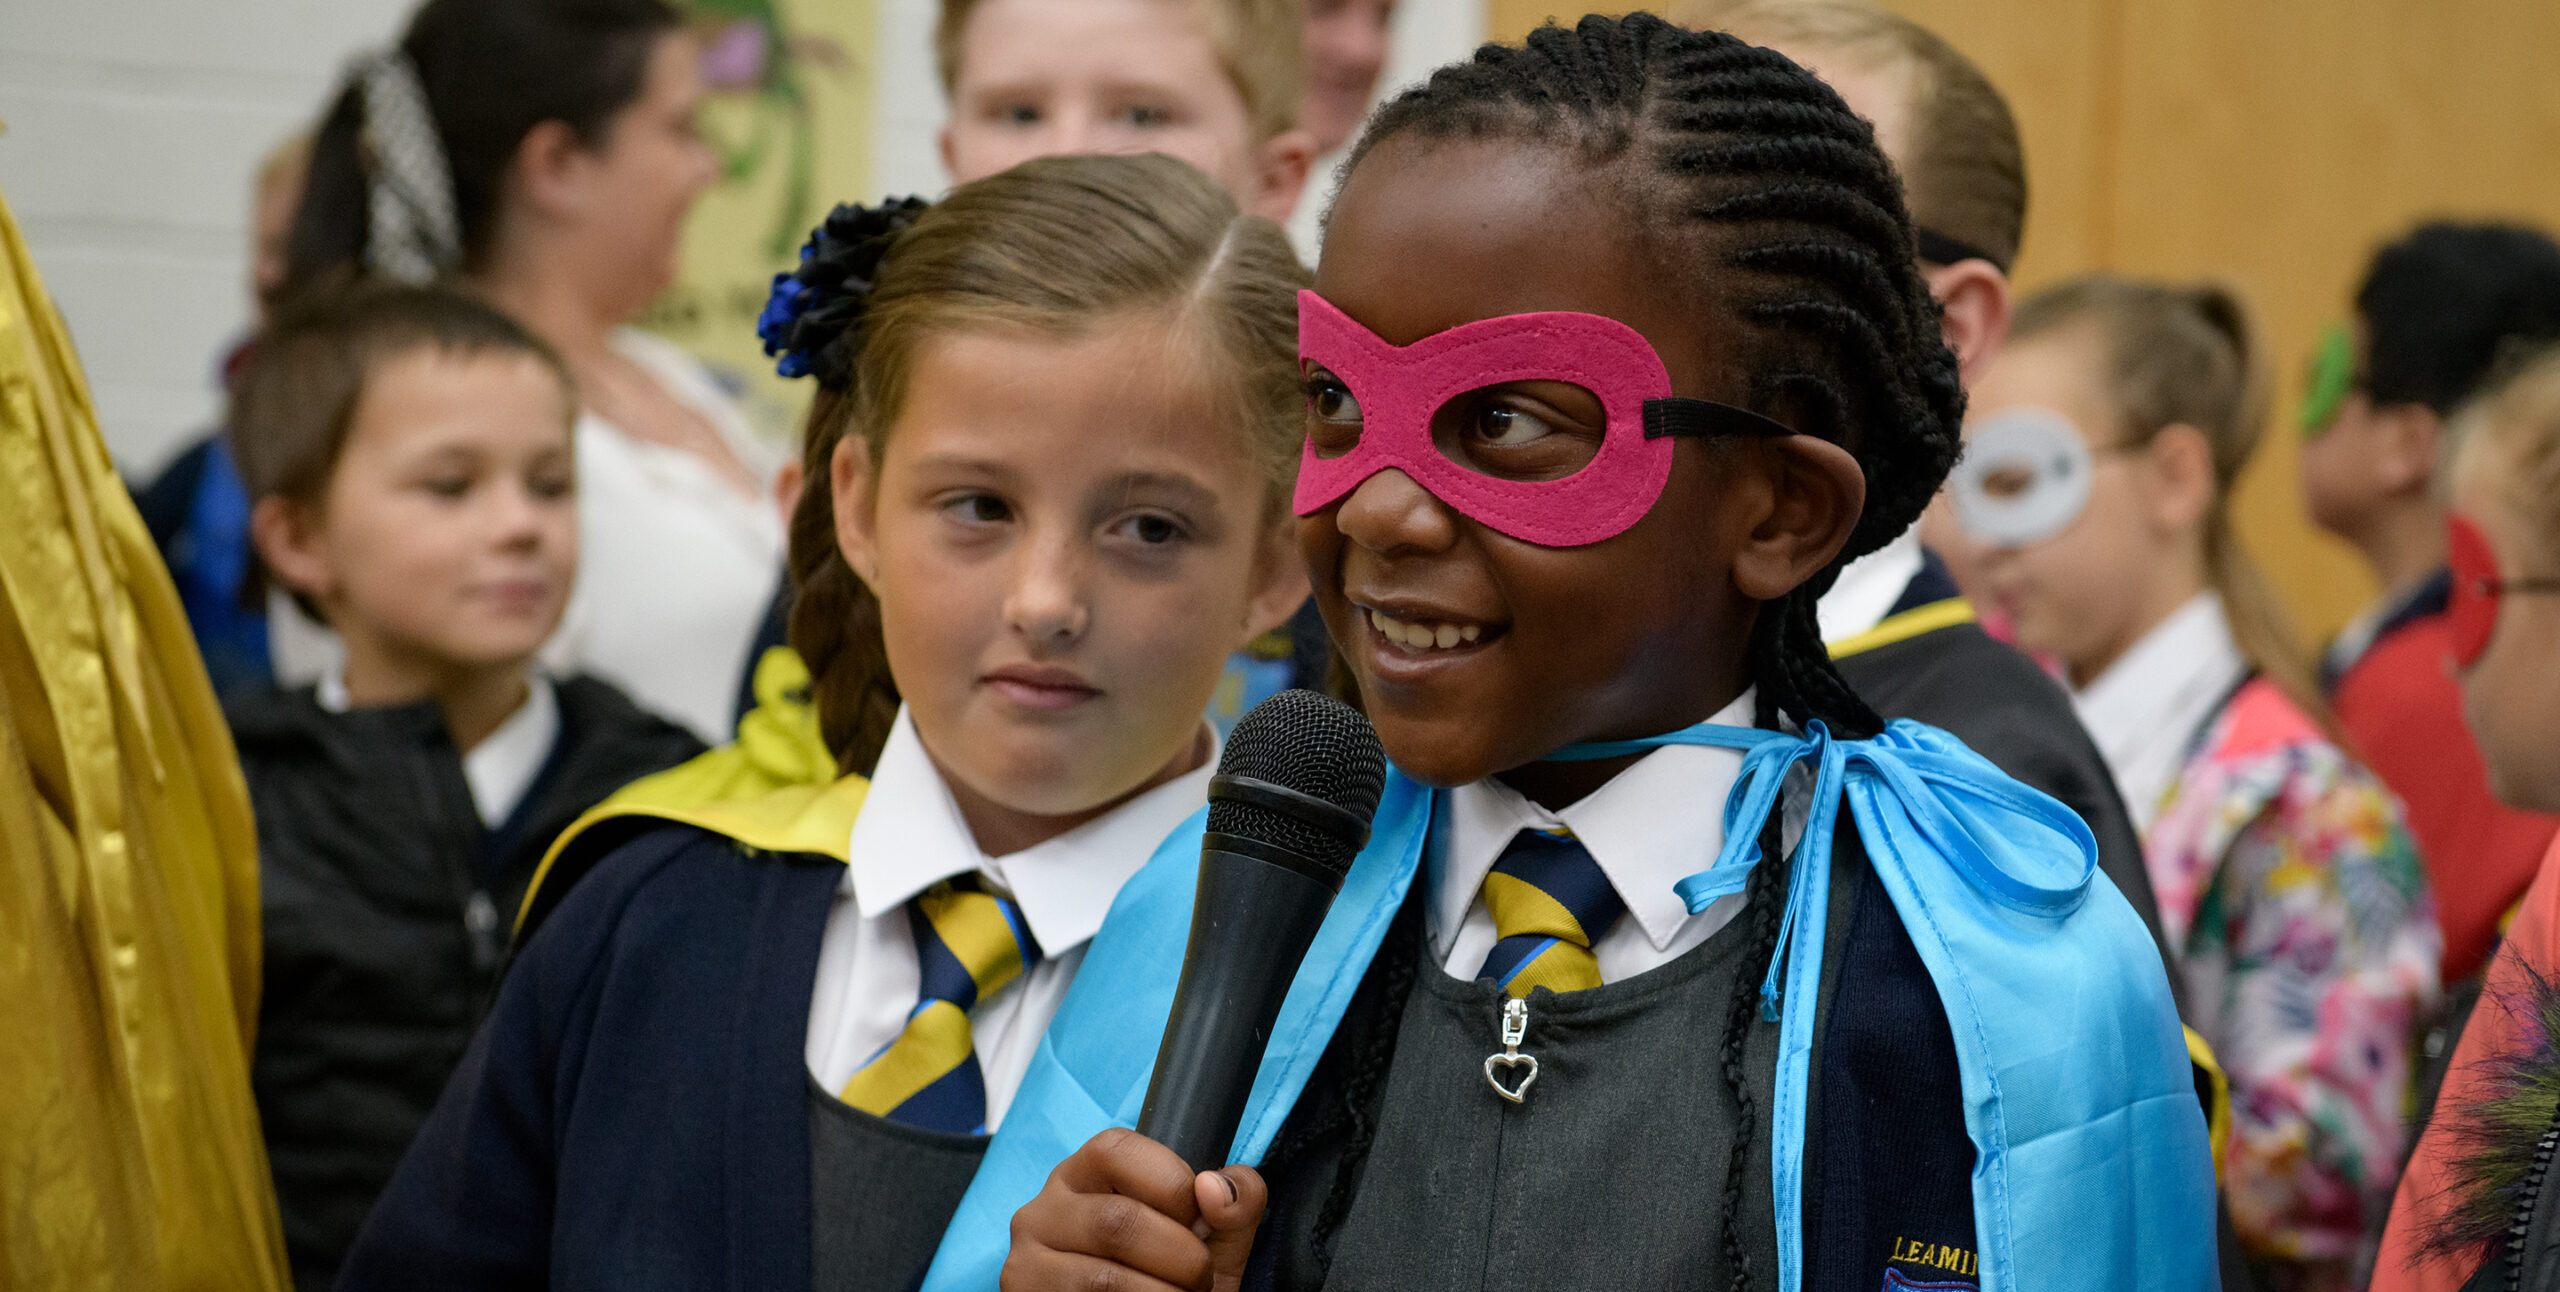 A young school pupil wearing a cape and mask speaks confidently into a microphone - From WoW's Super Heroes project.